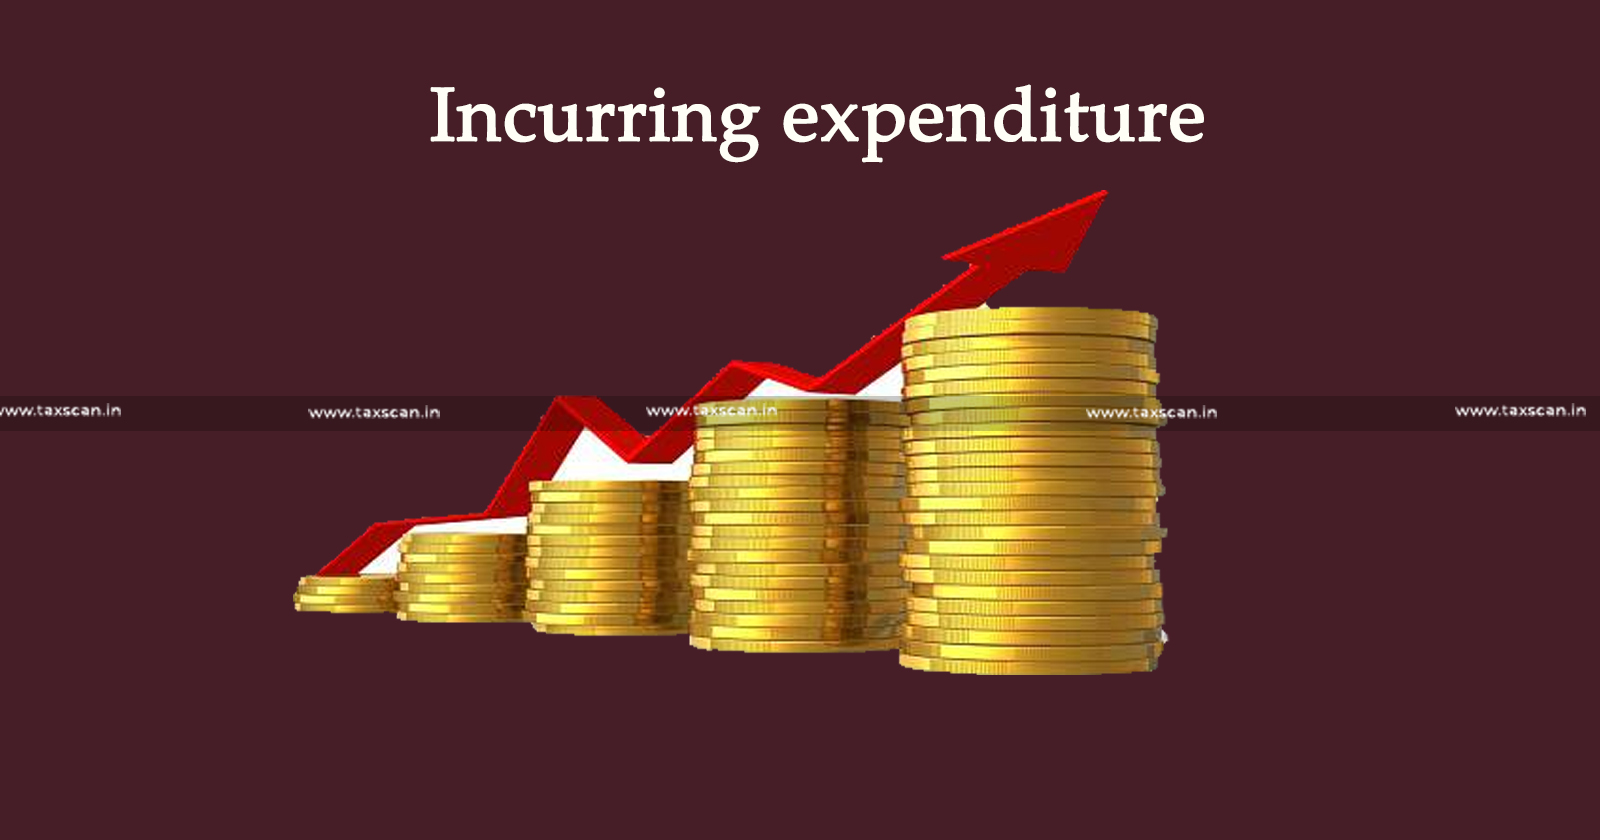 Incurring expenditure - expansion of business - Income Tax Act - ITAT